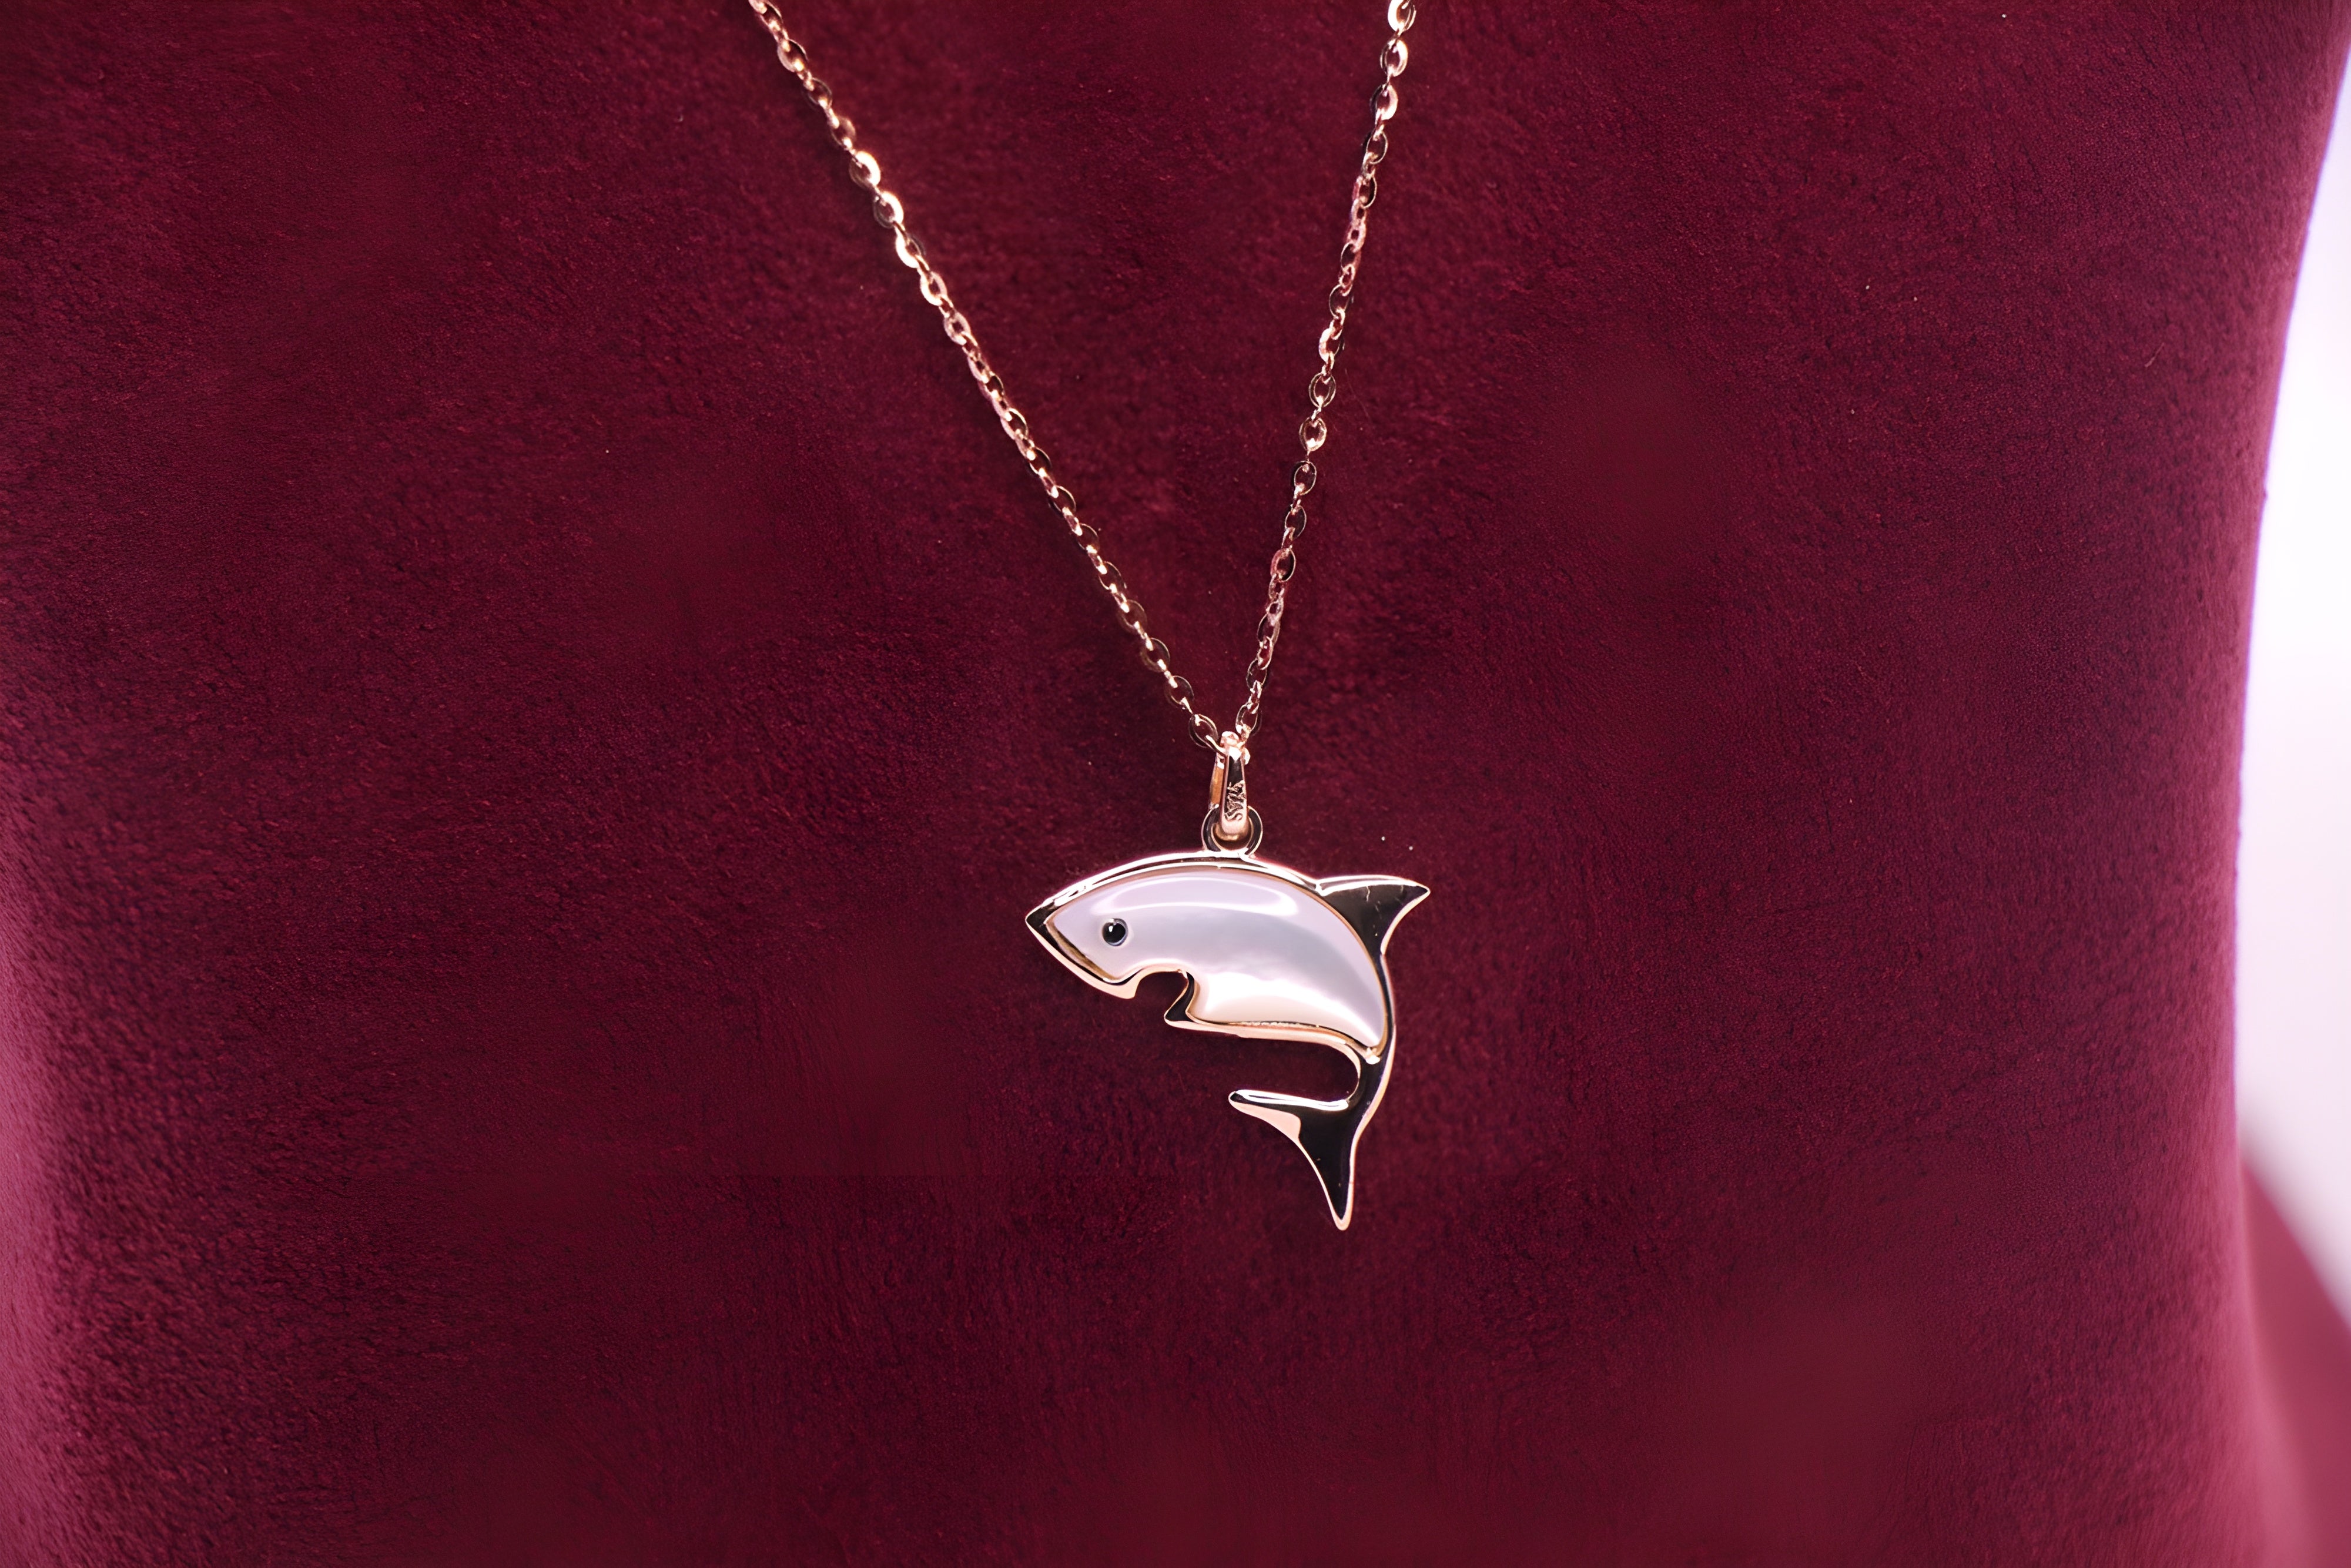 Gleaming Shark Sterling Silver Pendant with Swarovski Crystals